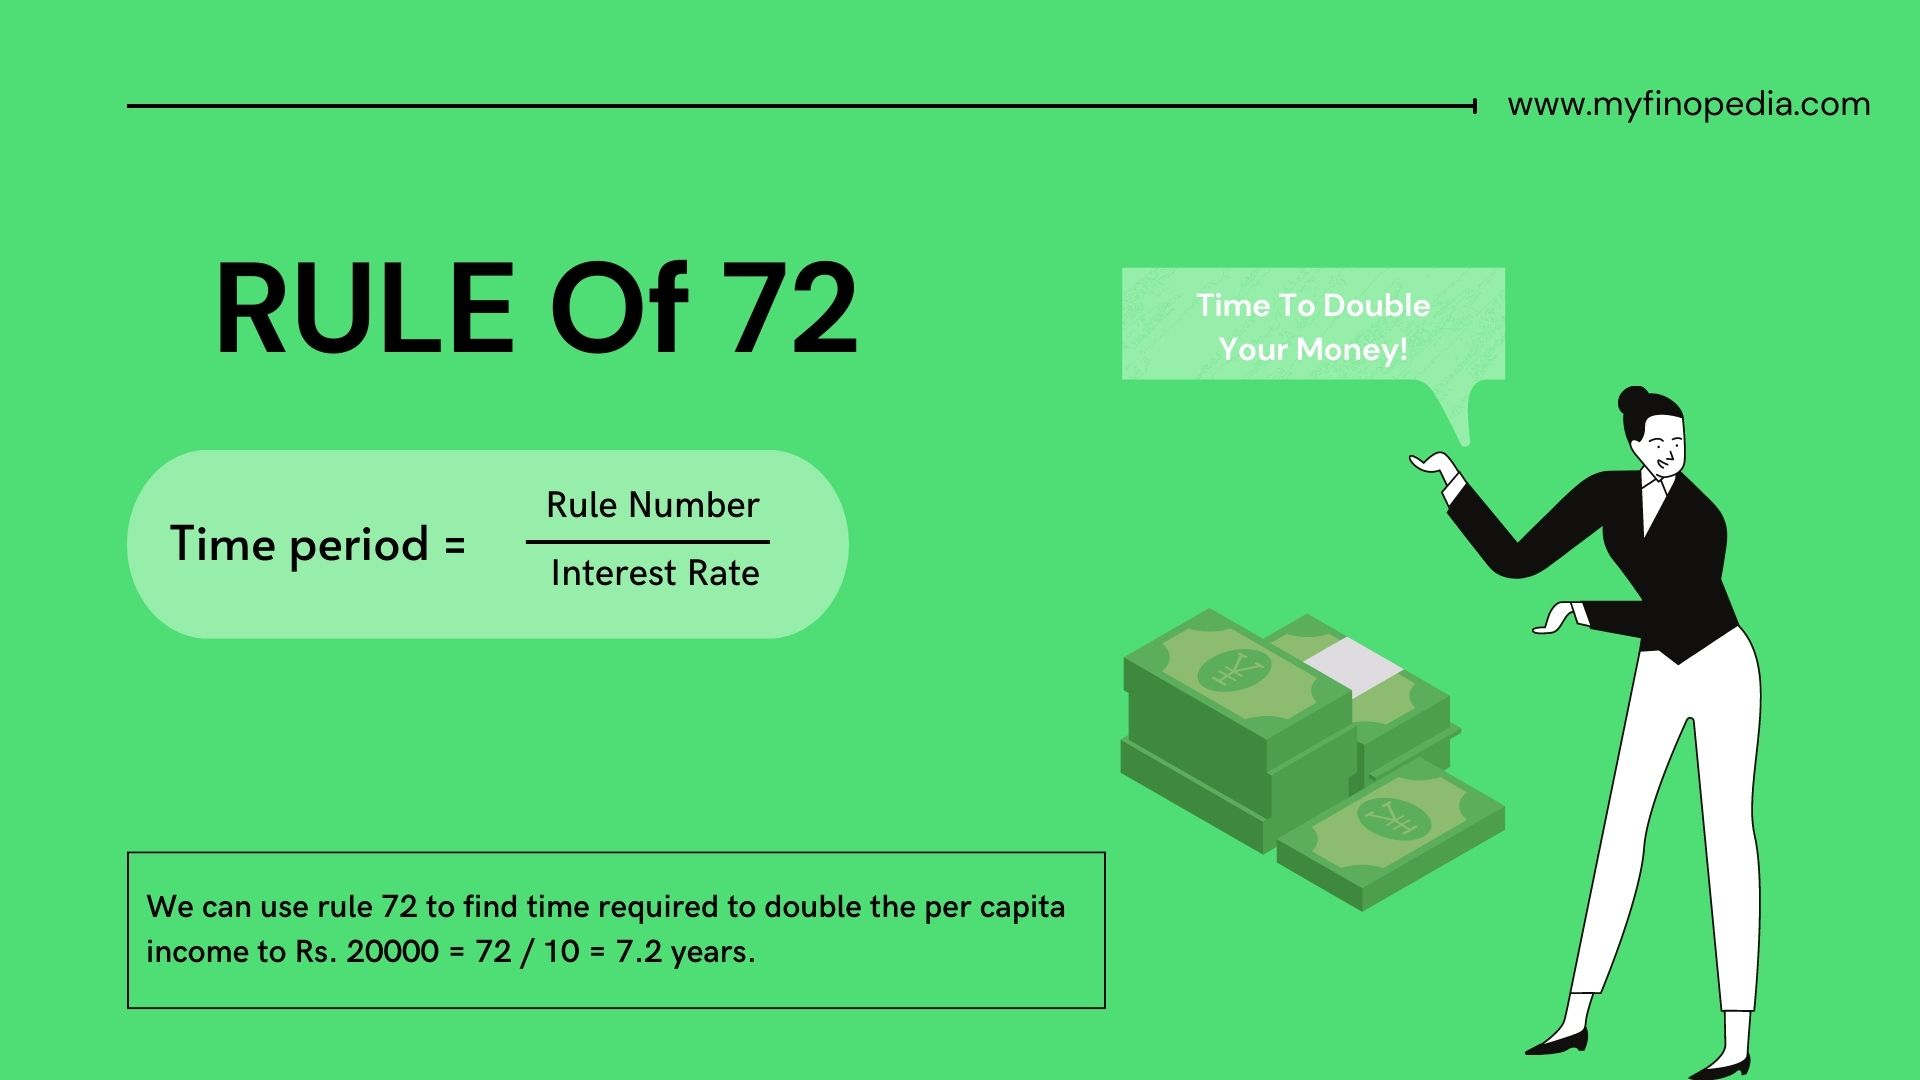 RULE of 72: Layman’s Tool To Calculate Time To Double Your Money